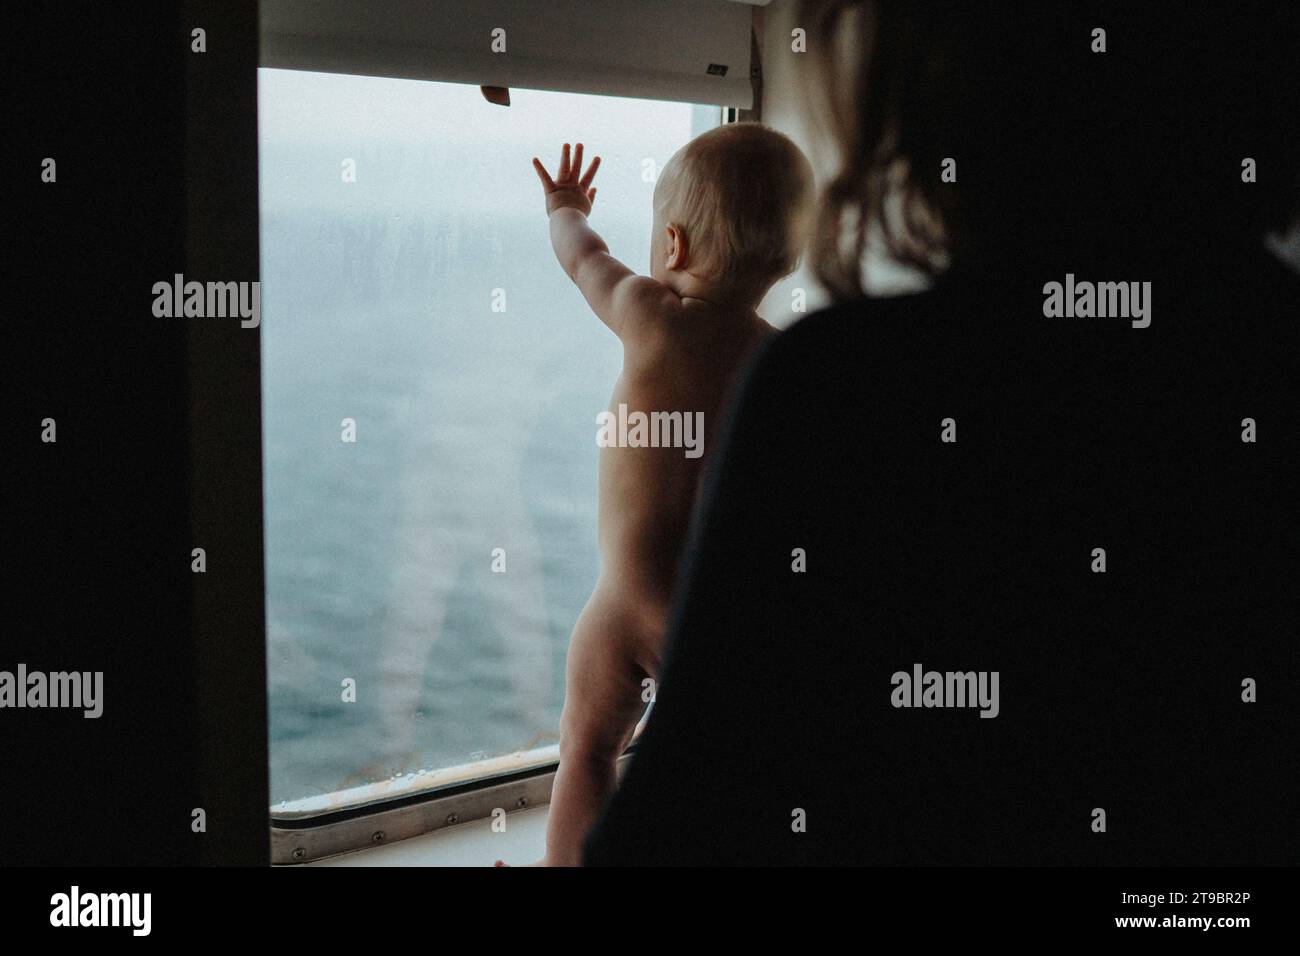 Mother supporting naked baby who is standing on window sill Stock Photo